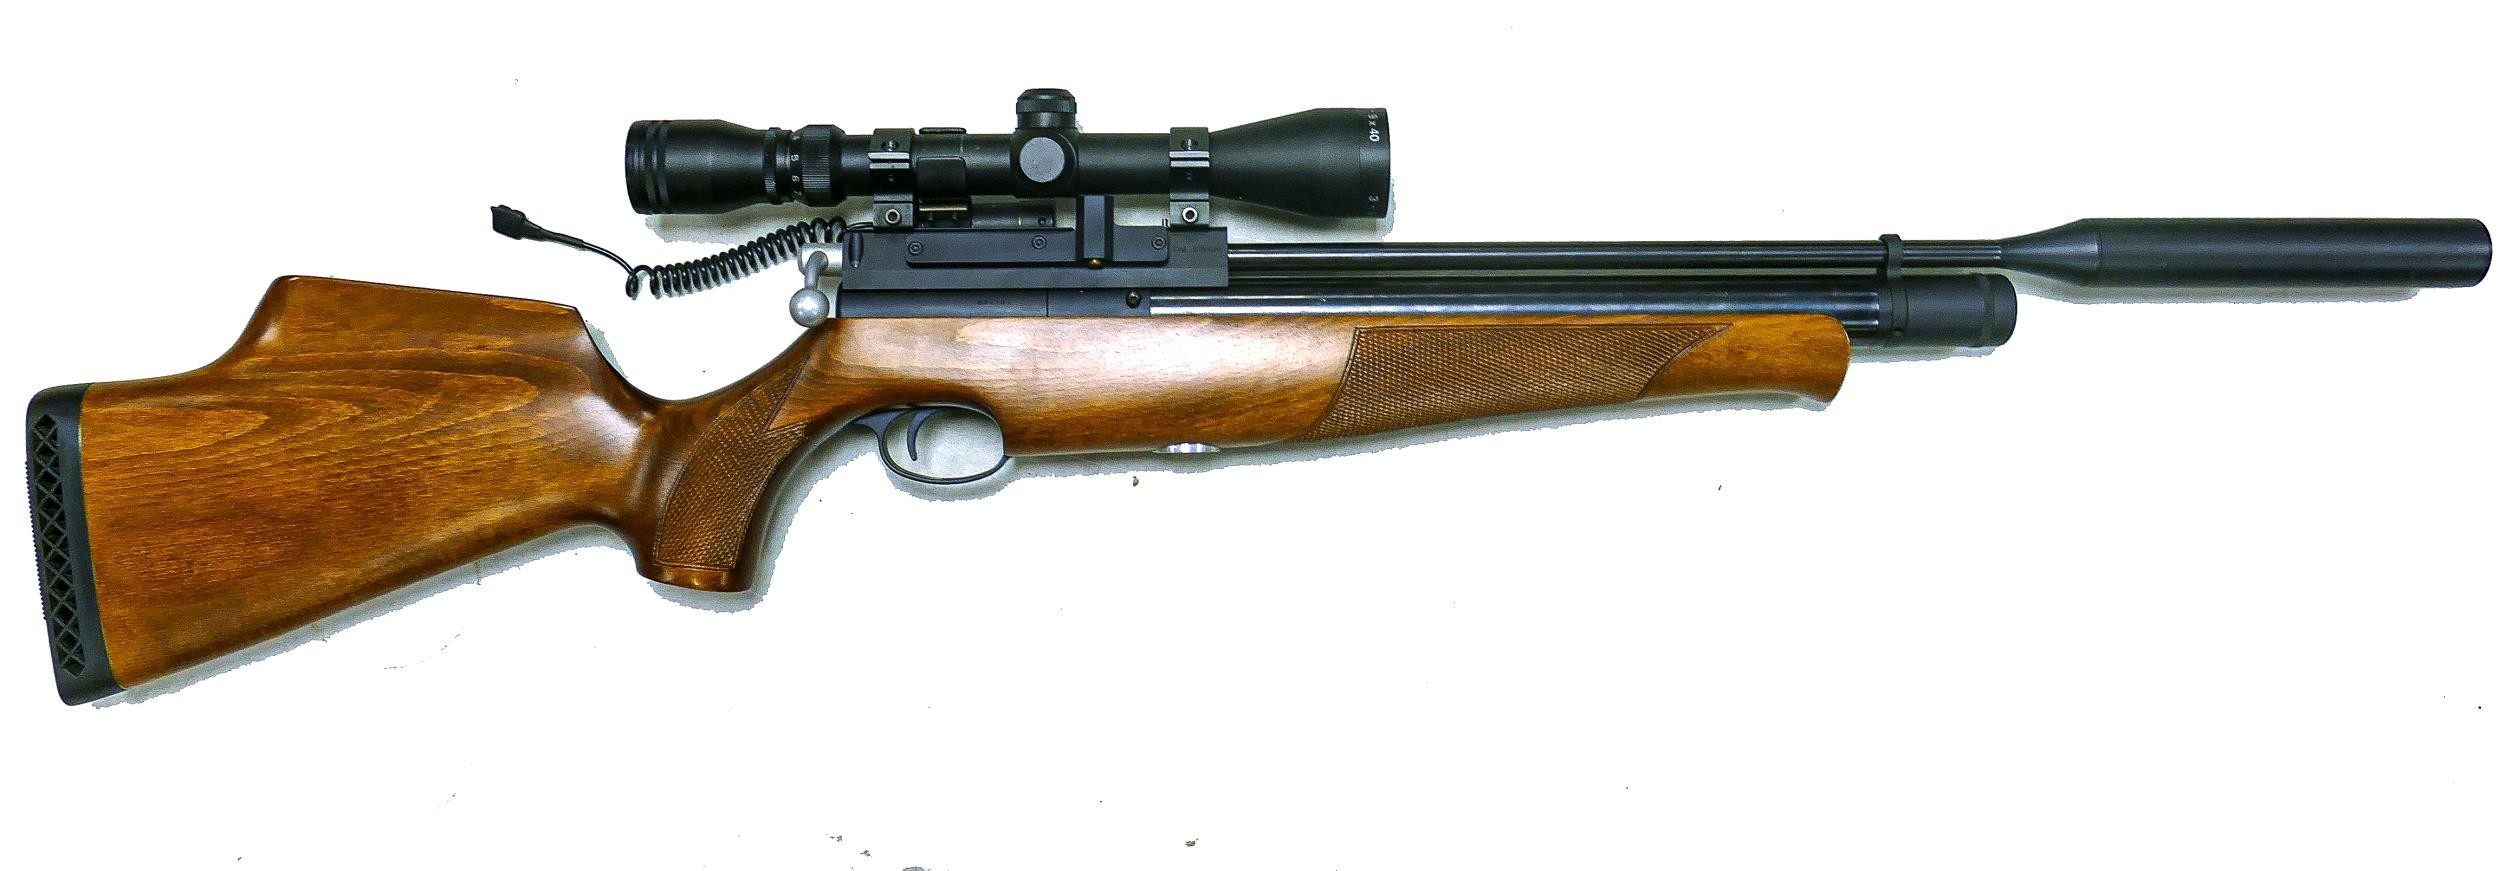 AIR ARMS S410 .177 Carbine English made Air Rifle, fitted Blazer 3-9x40 scope with holdall.